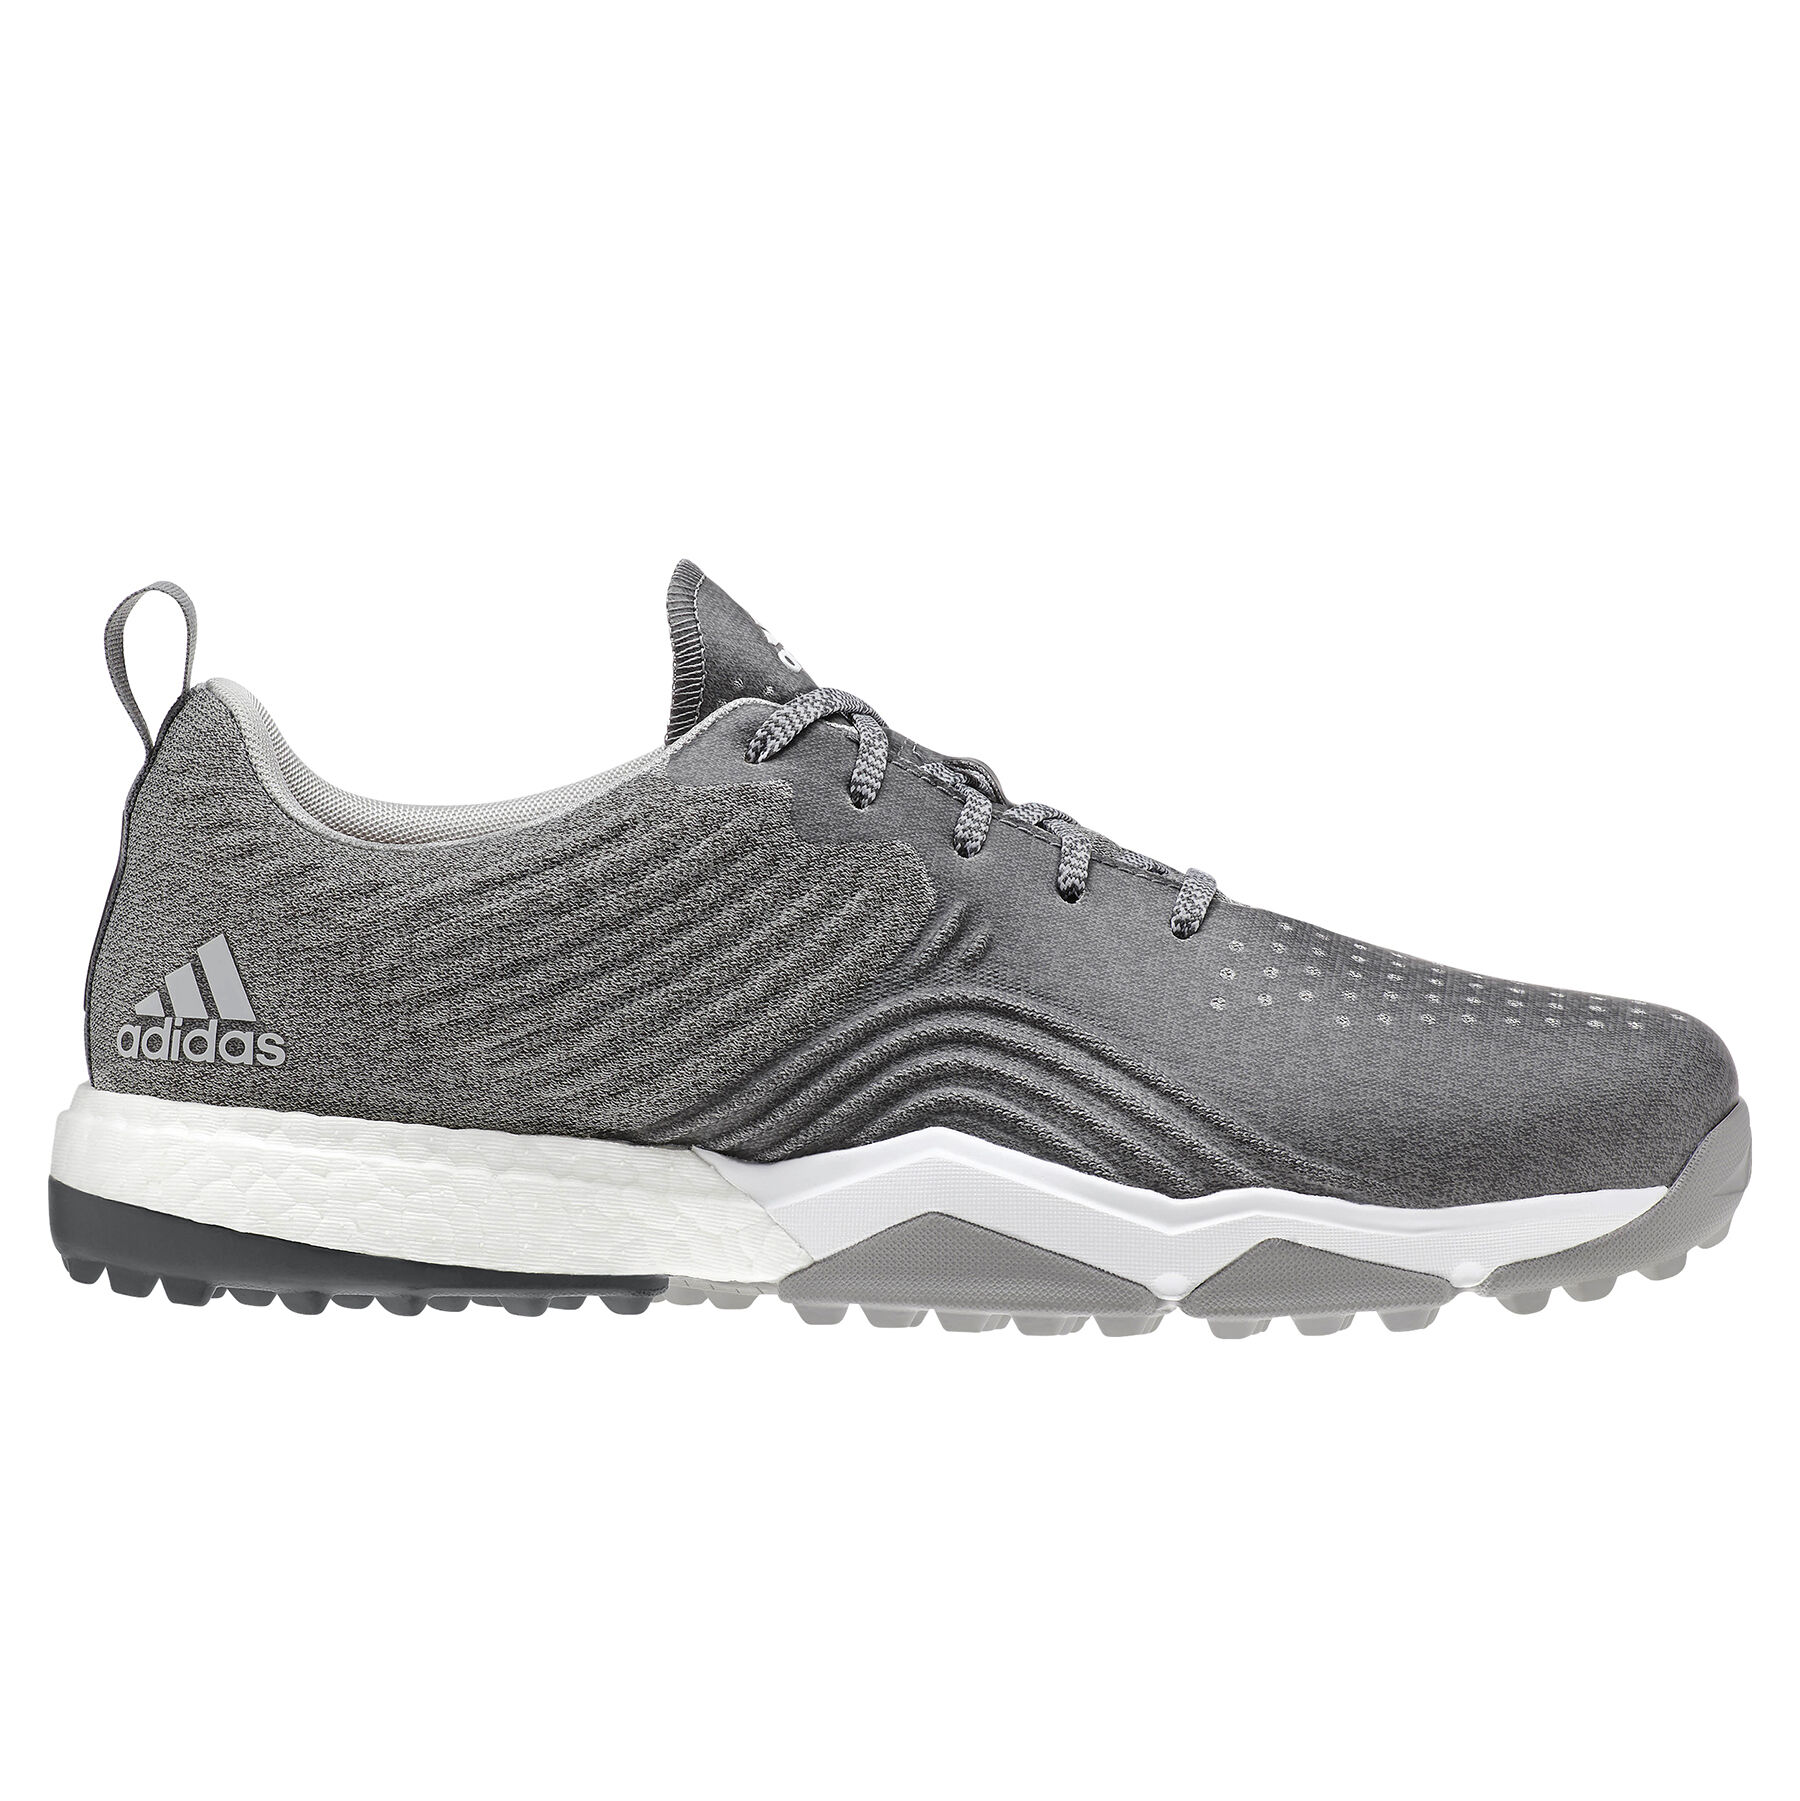 adidas adipower 4orged s golf shoes grey